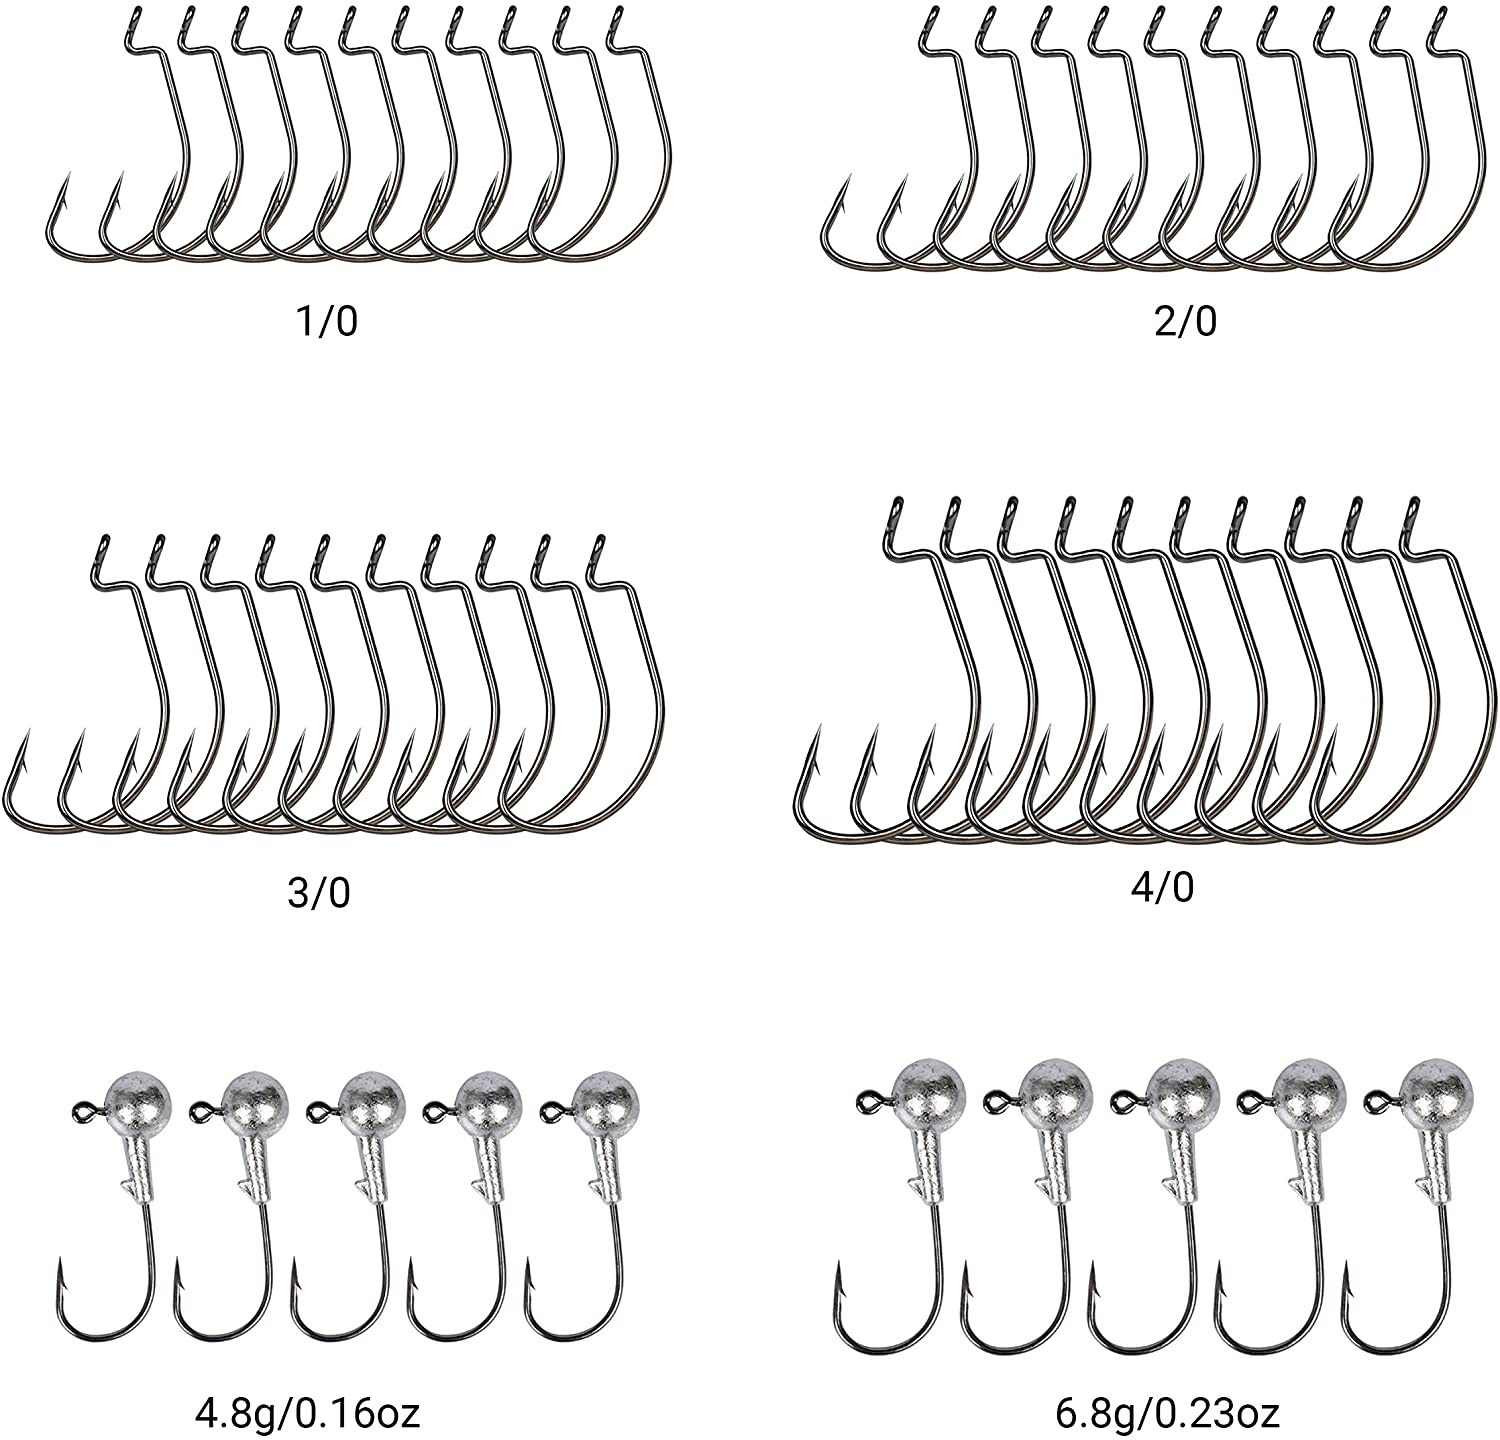 Fishing Terminal Tackle Accessories Hooks Weights Jig Heads O-Rings Rolling  Swivels Fastlock Snaps Fishing Beads Space Beans Sinker Slides Ice Fish